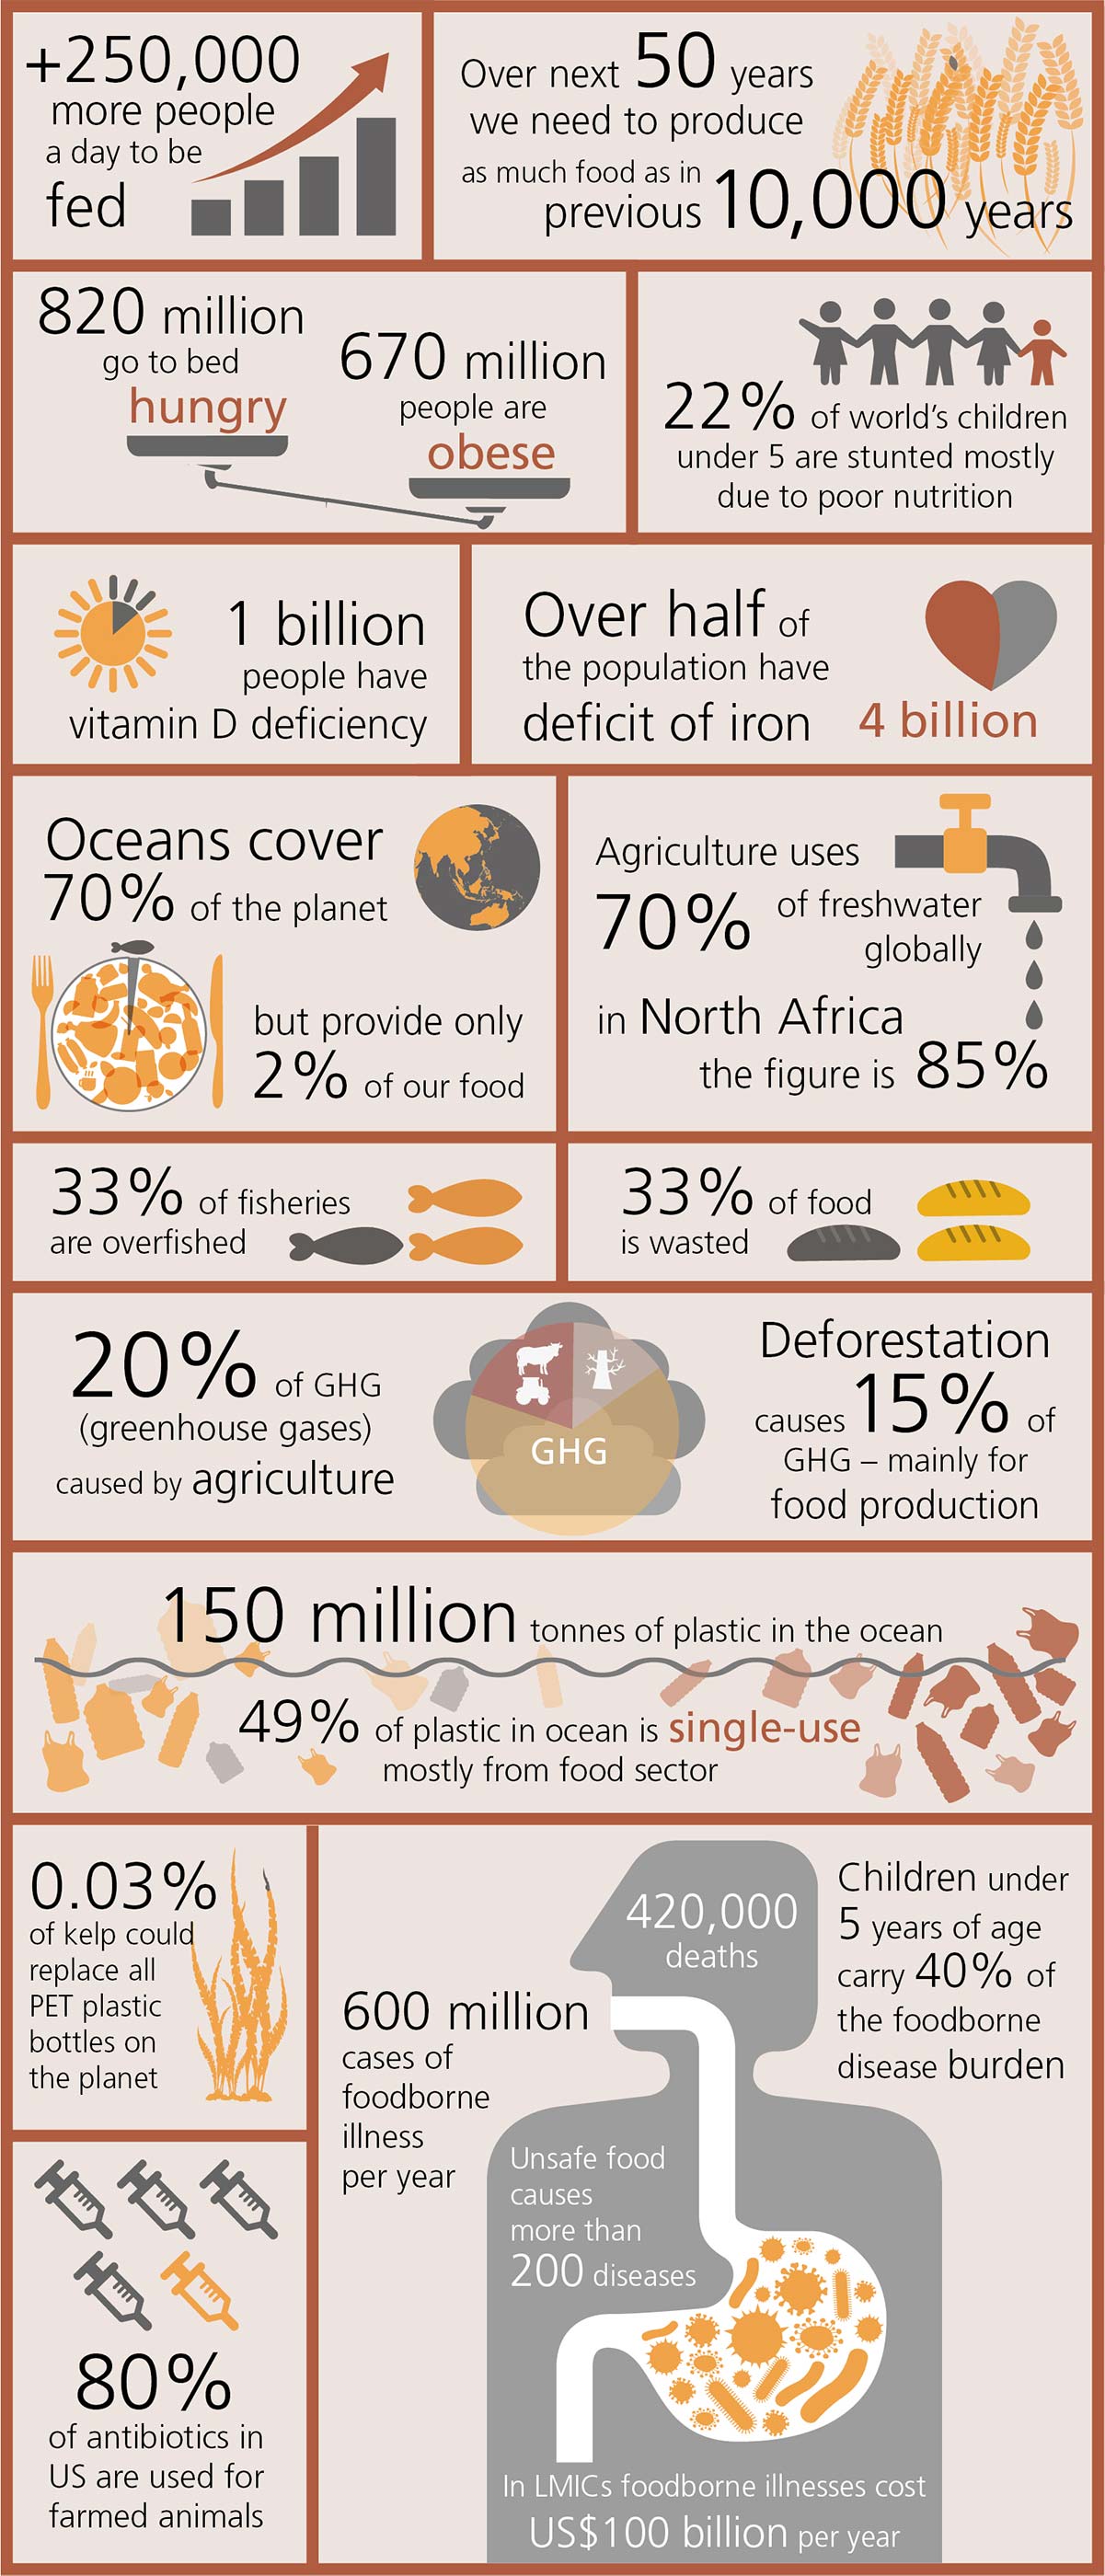 Food facts and figures from Foresight review of food safety from the Lloyd's Register Foundation